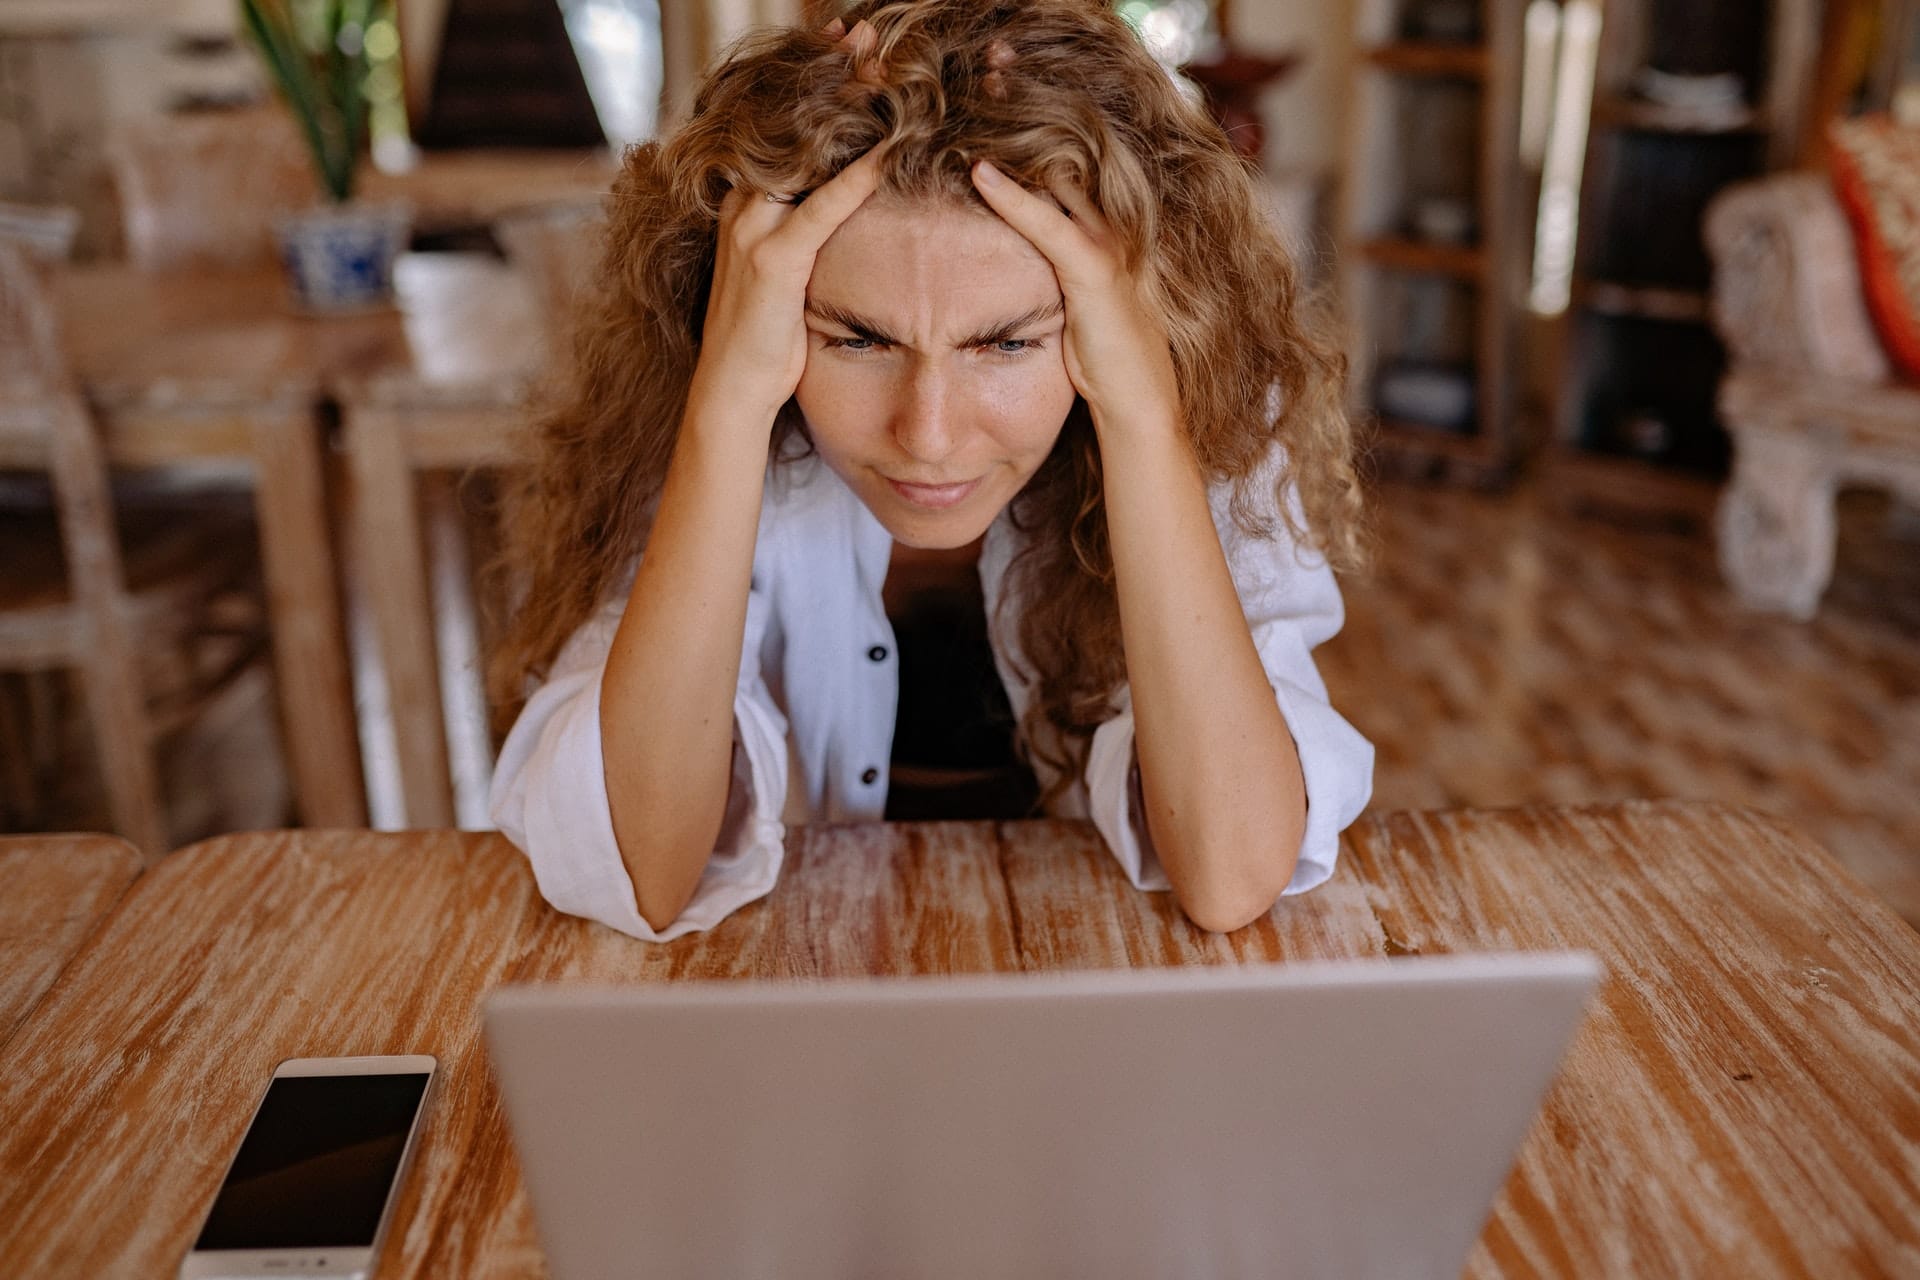 A woman sitting in front of her laptop, she is looking at the screen with a confused look on her face while holding her head.